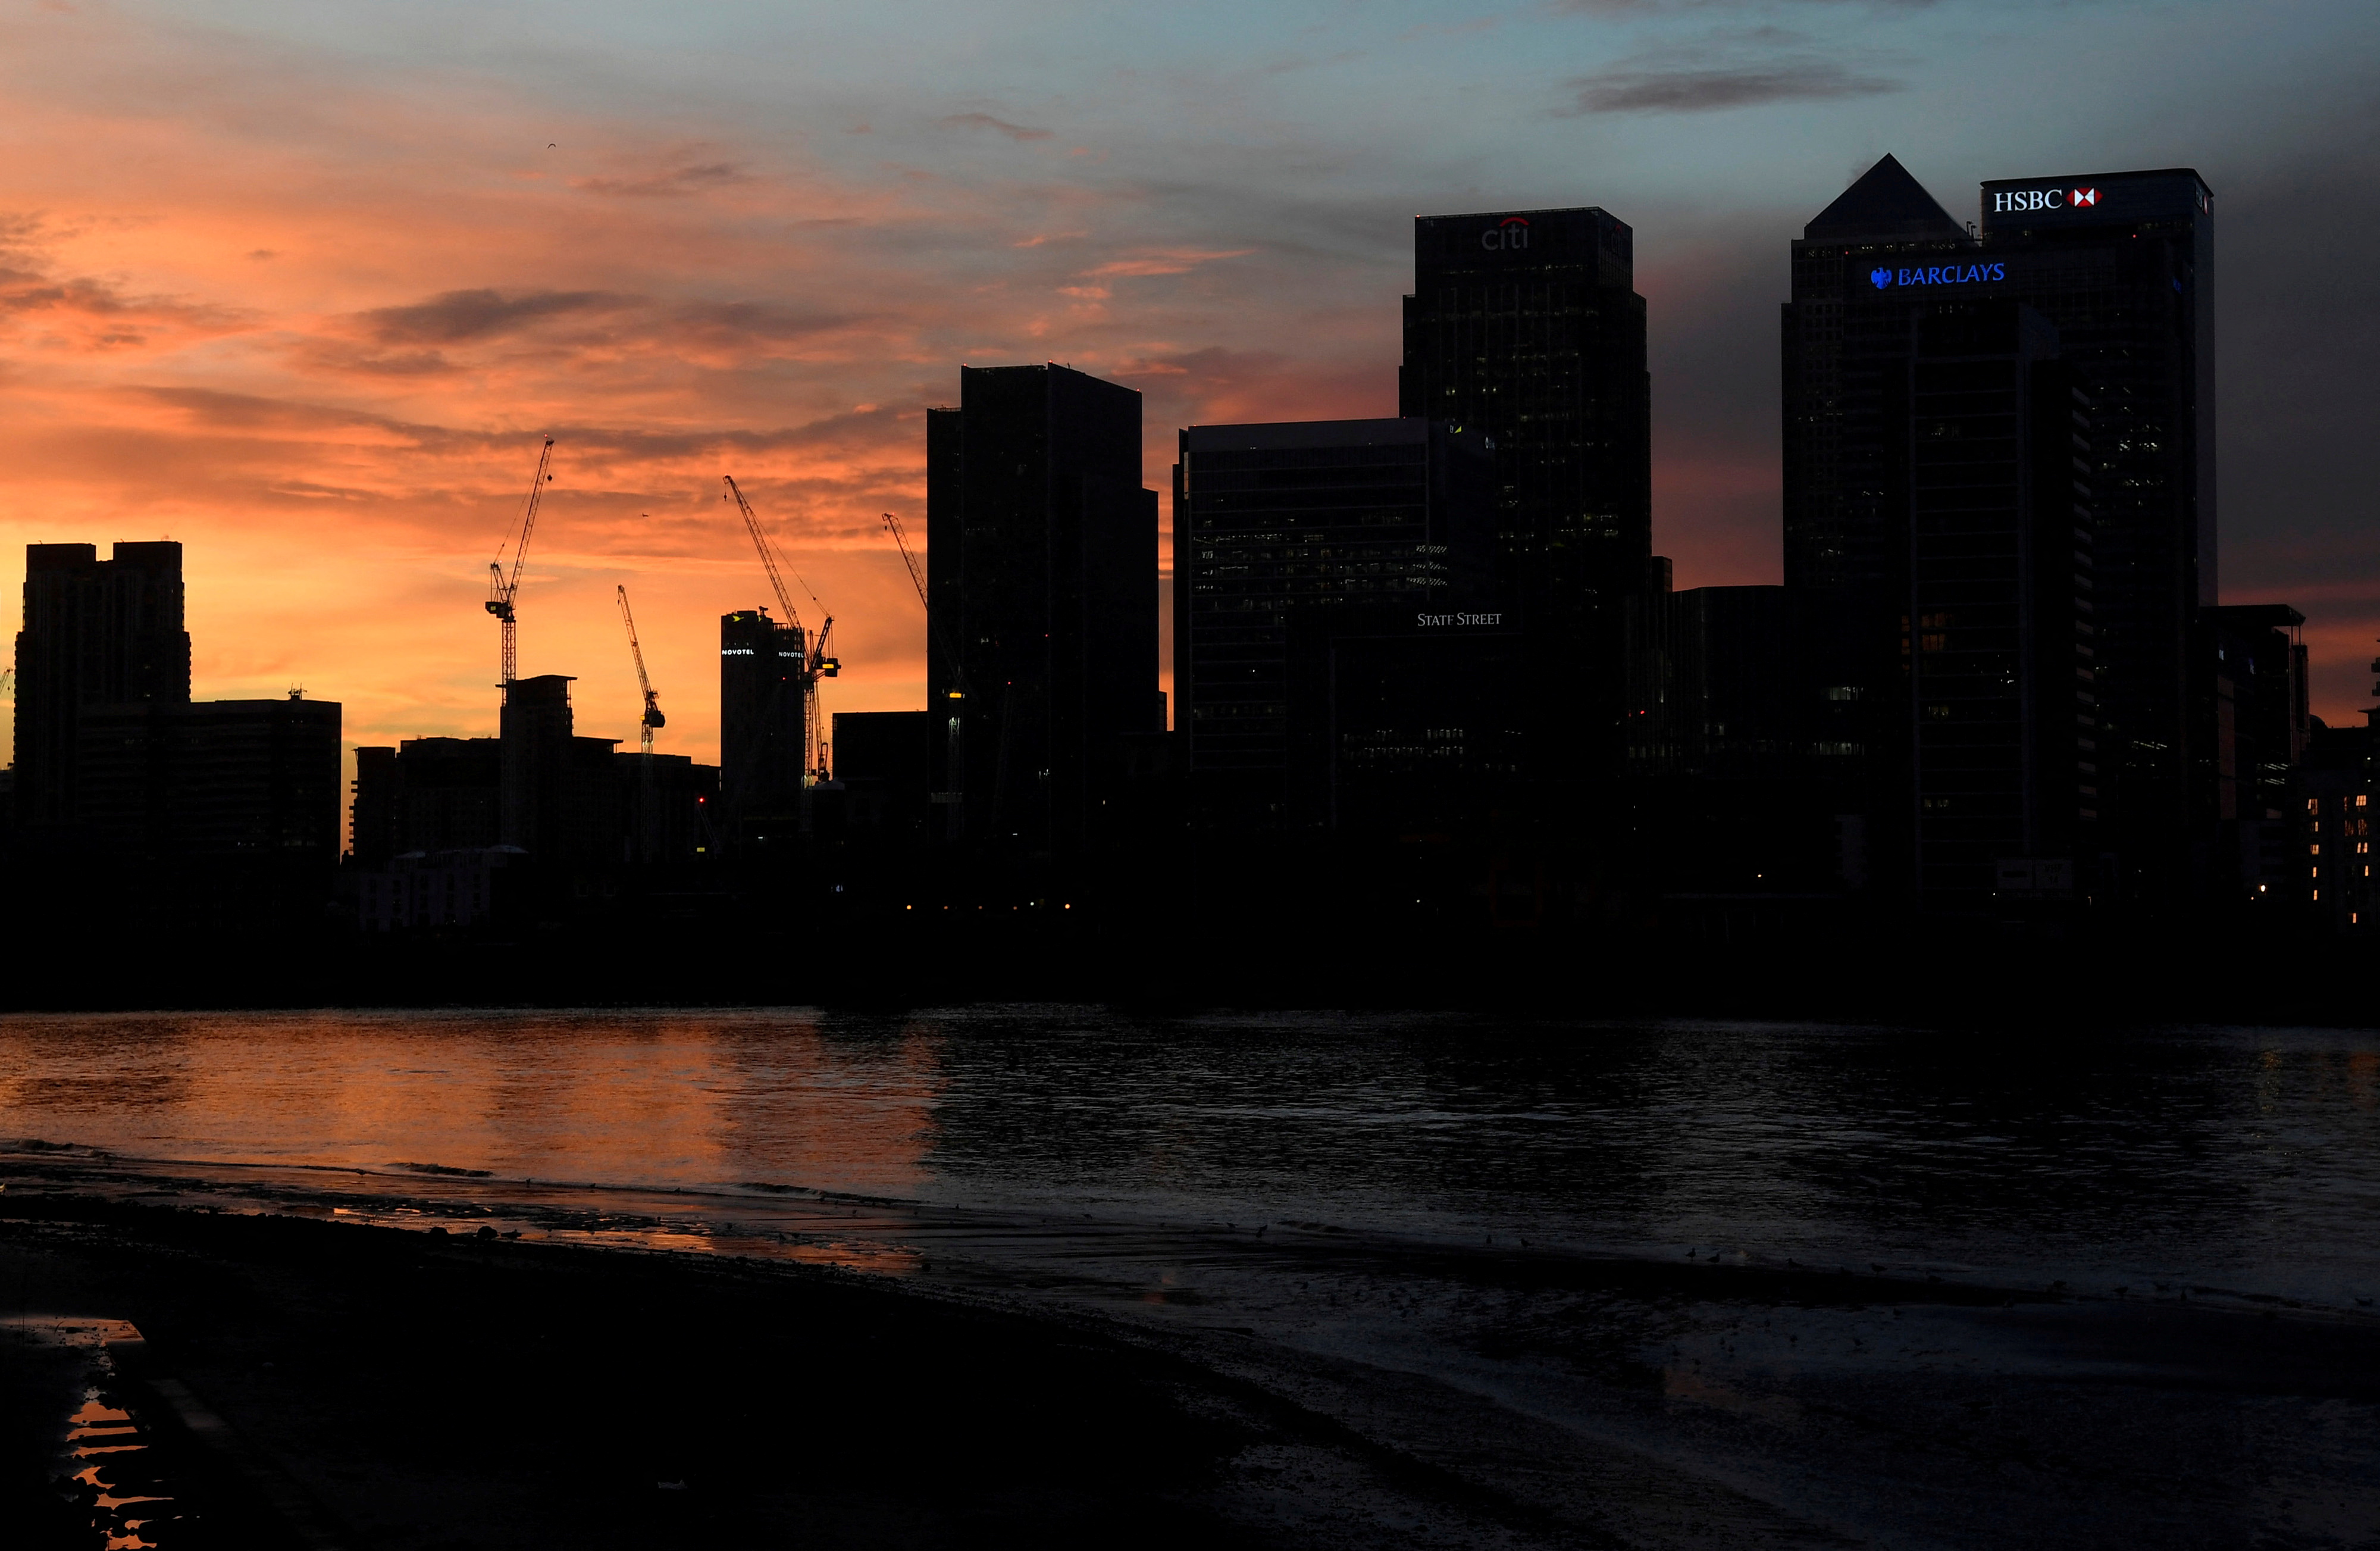 The Canary Wharf business district is seen at dusk in London